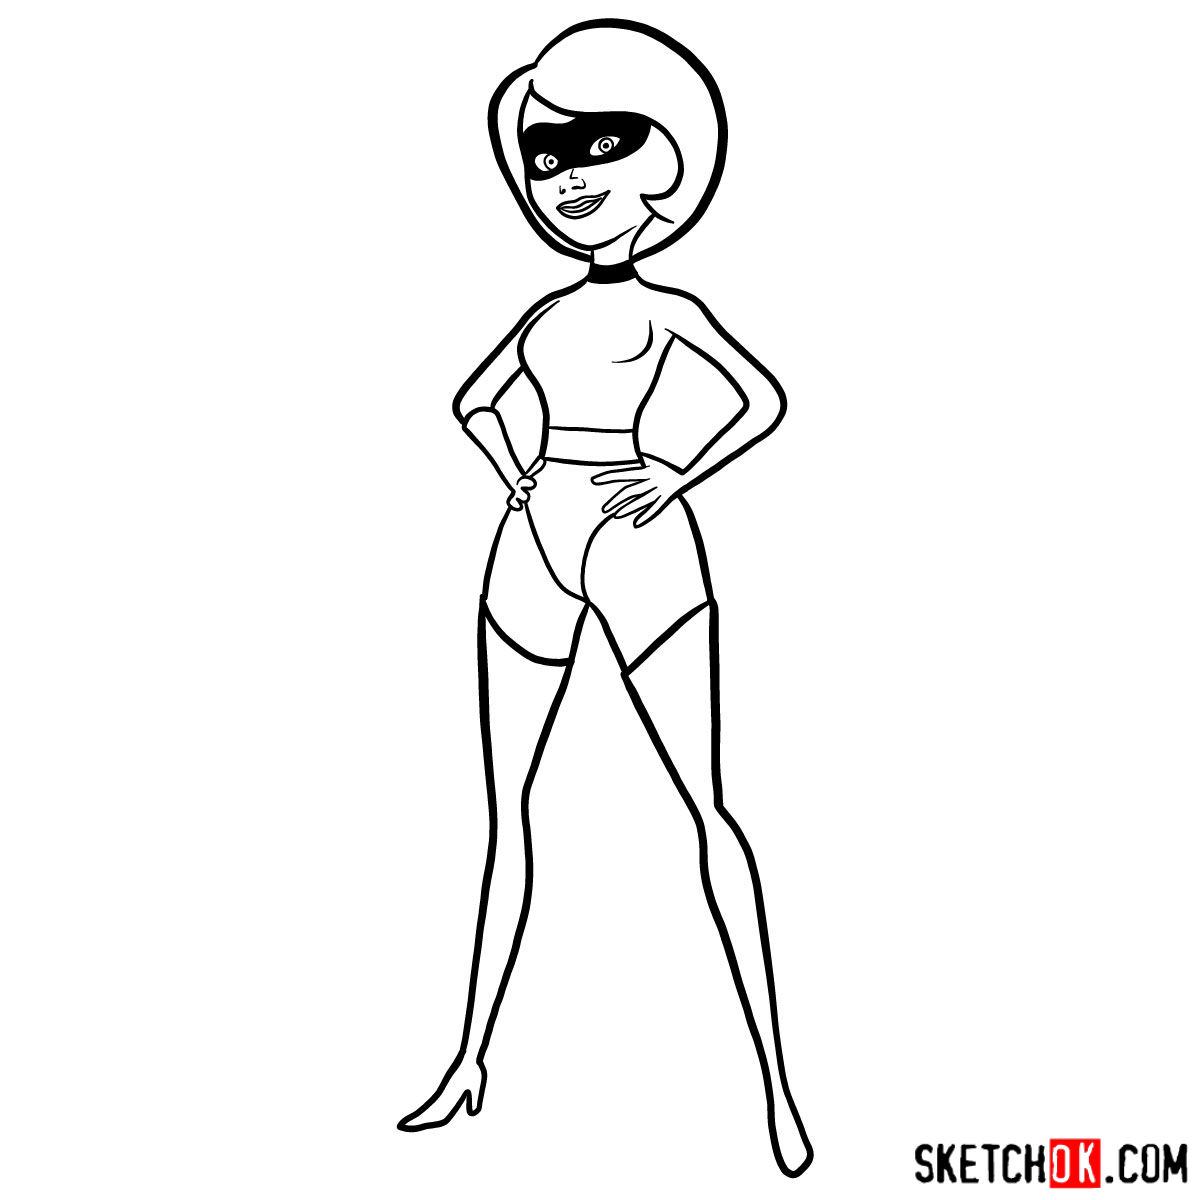 How to draw Elastigirl from The Incredibles - step 11